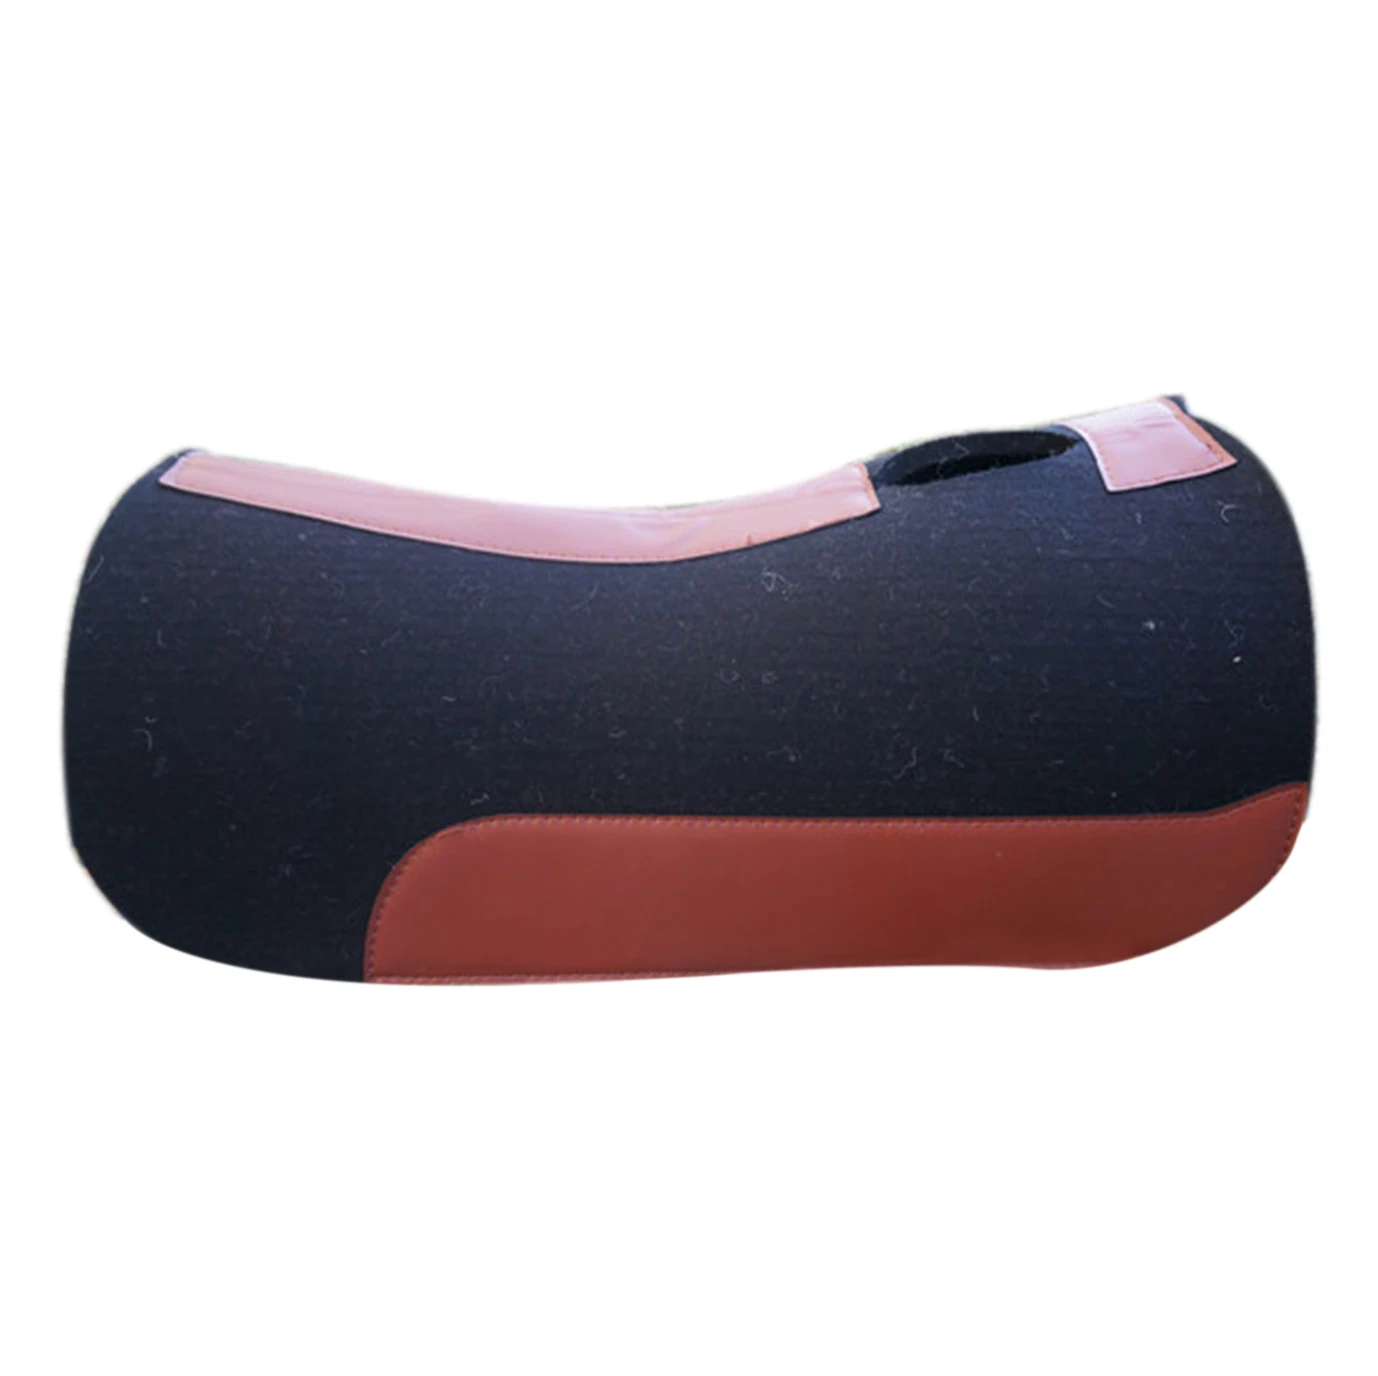 

Horse Riding Equipment 1 Inch Thick Pressed Contoured Western Wool Felt Saddle Pad For Horses